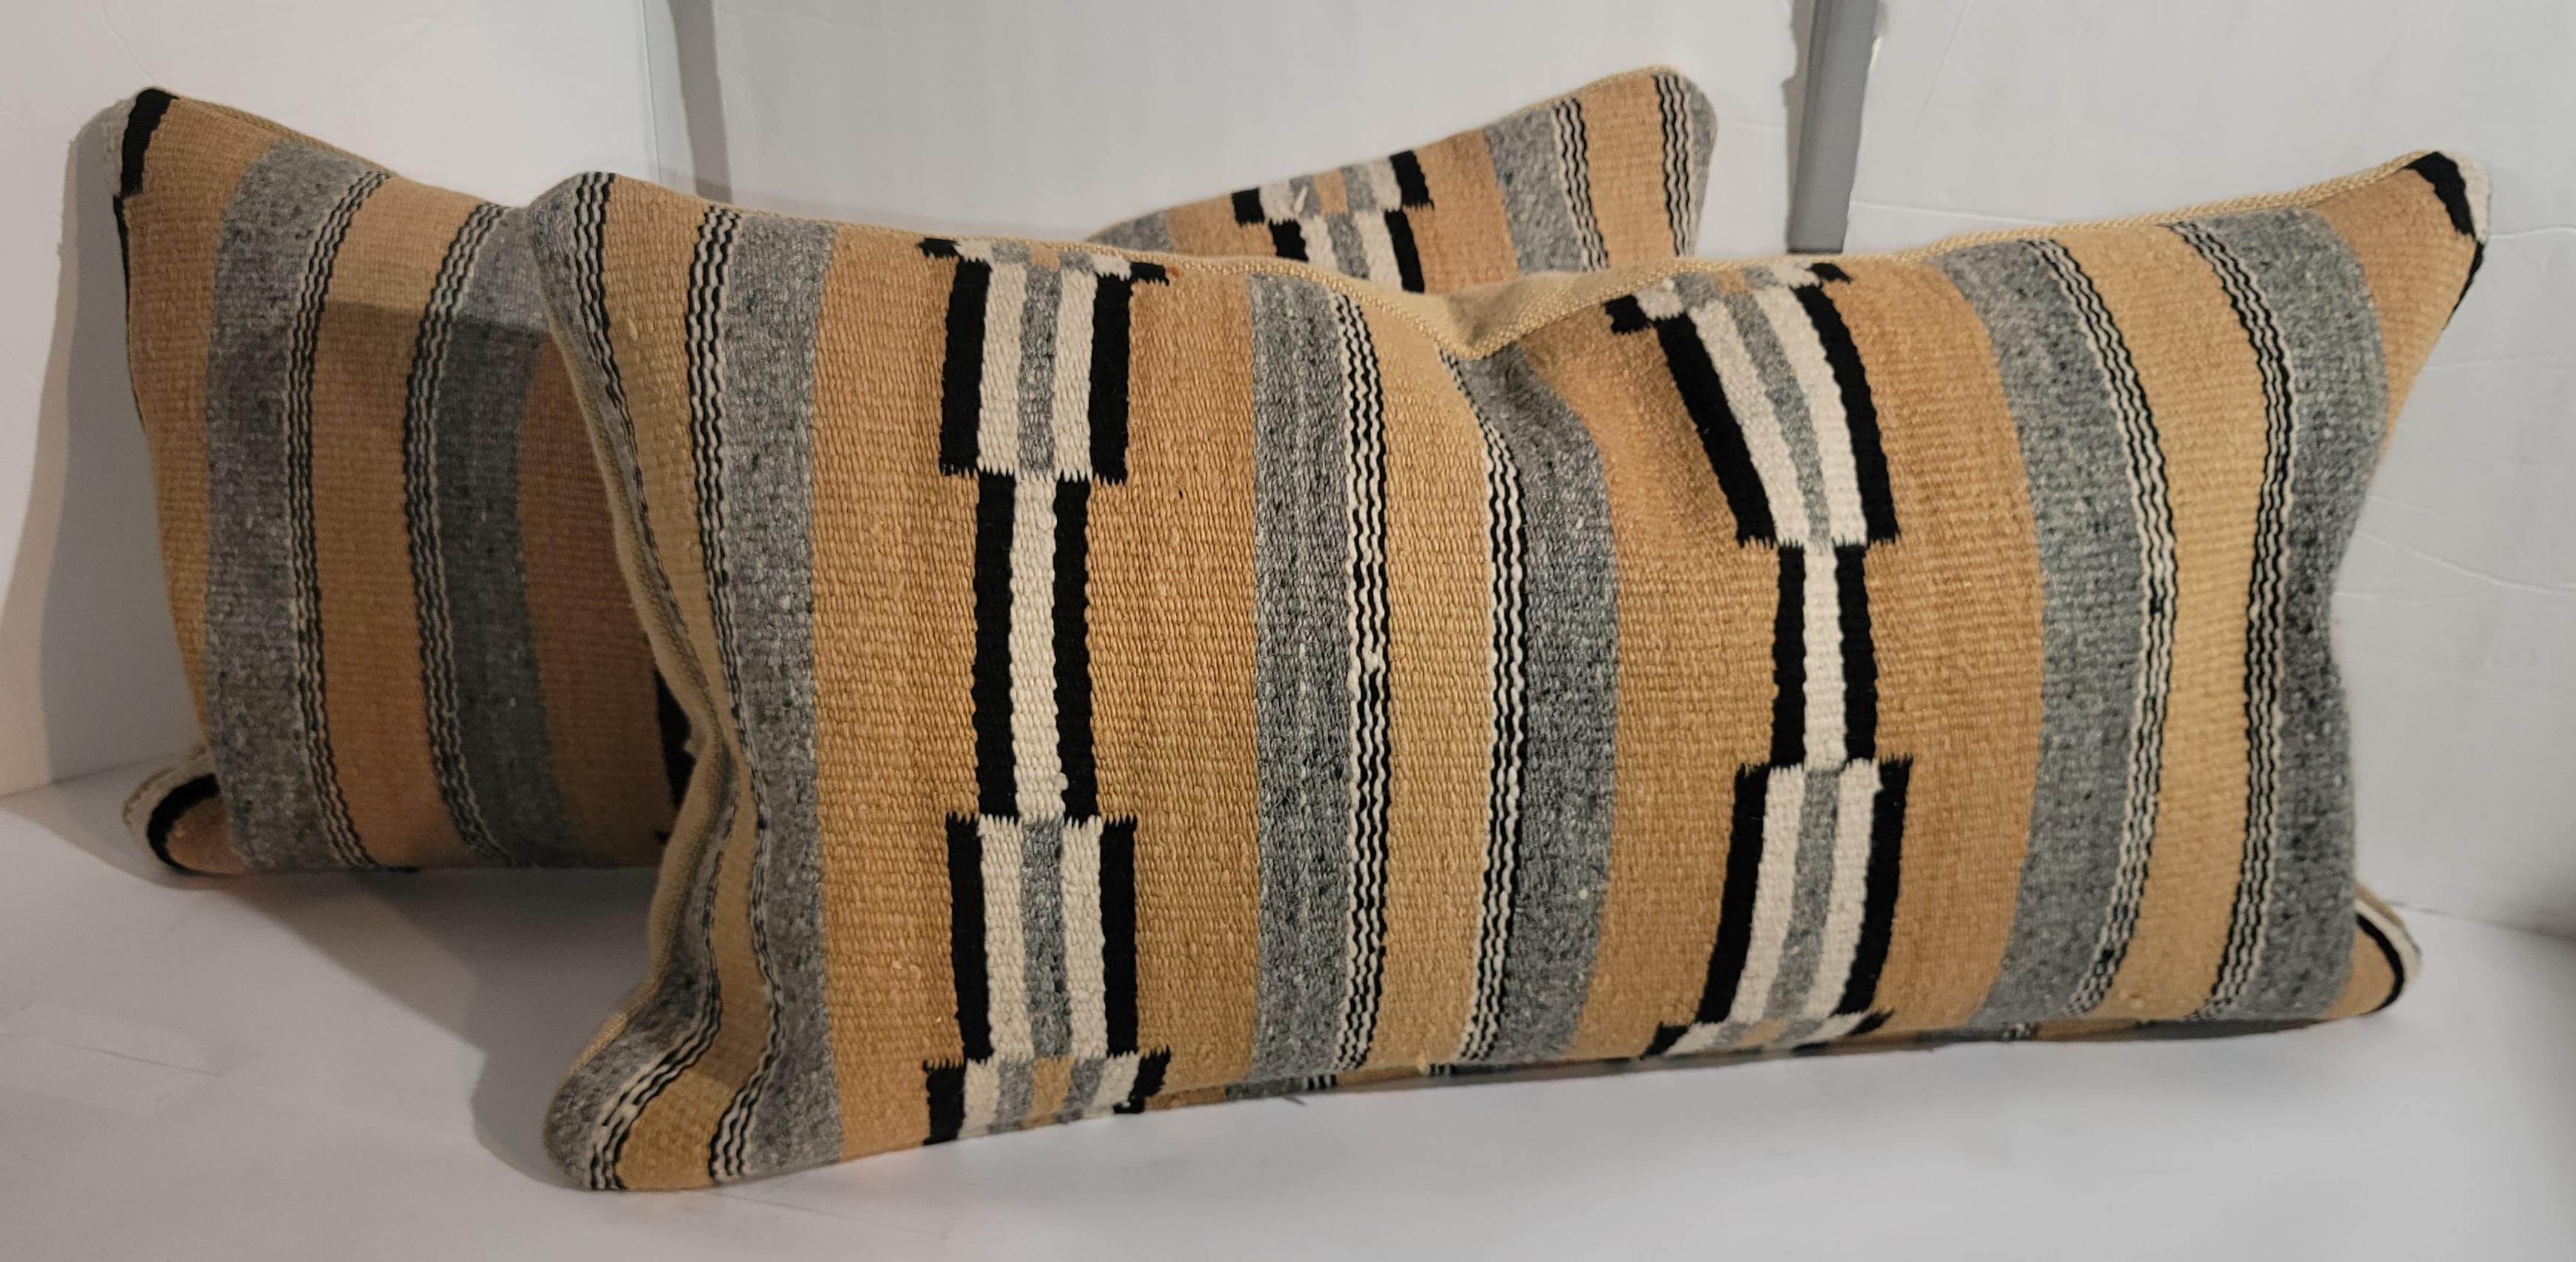 Adirondack Pair of Chinle Navajo Indian Weaving Bolster Pillows -2 For Sale